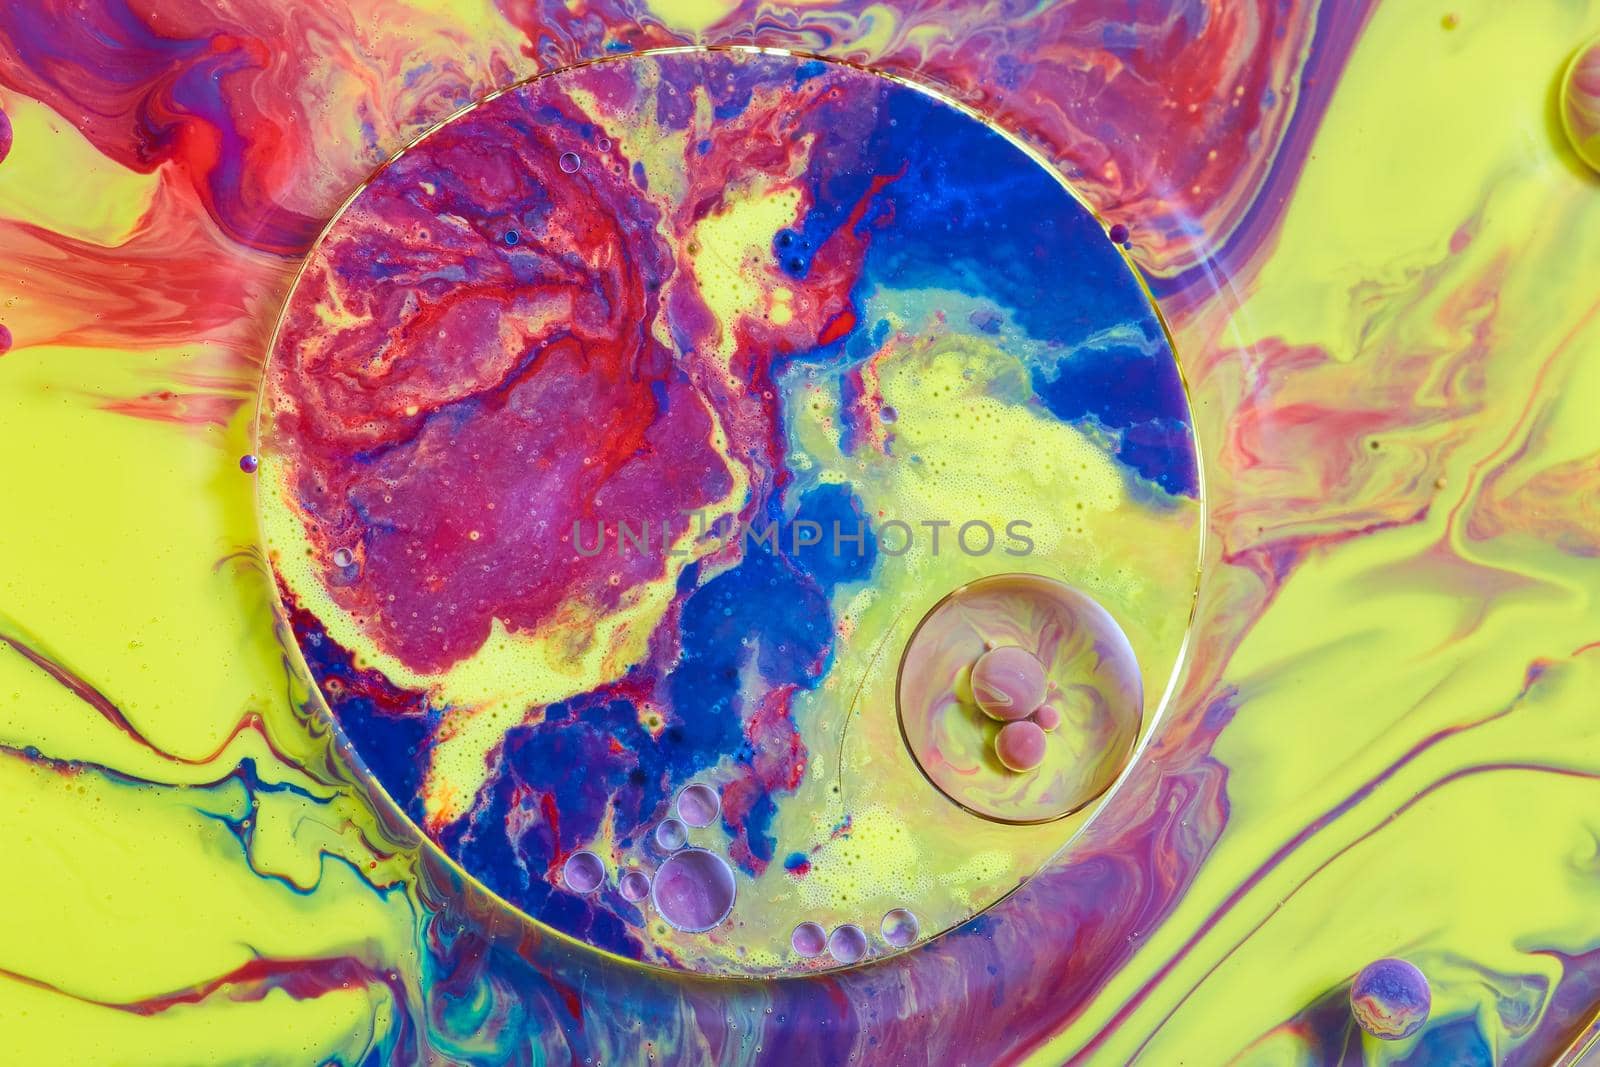 Image of Red, yellow, and blue colors on liquid surface with tiny orbs and circular patterns